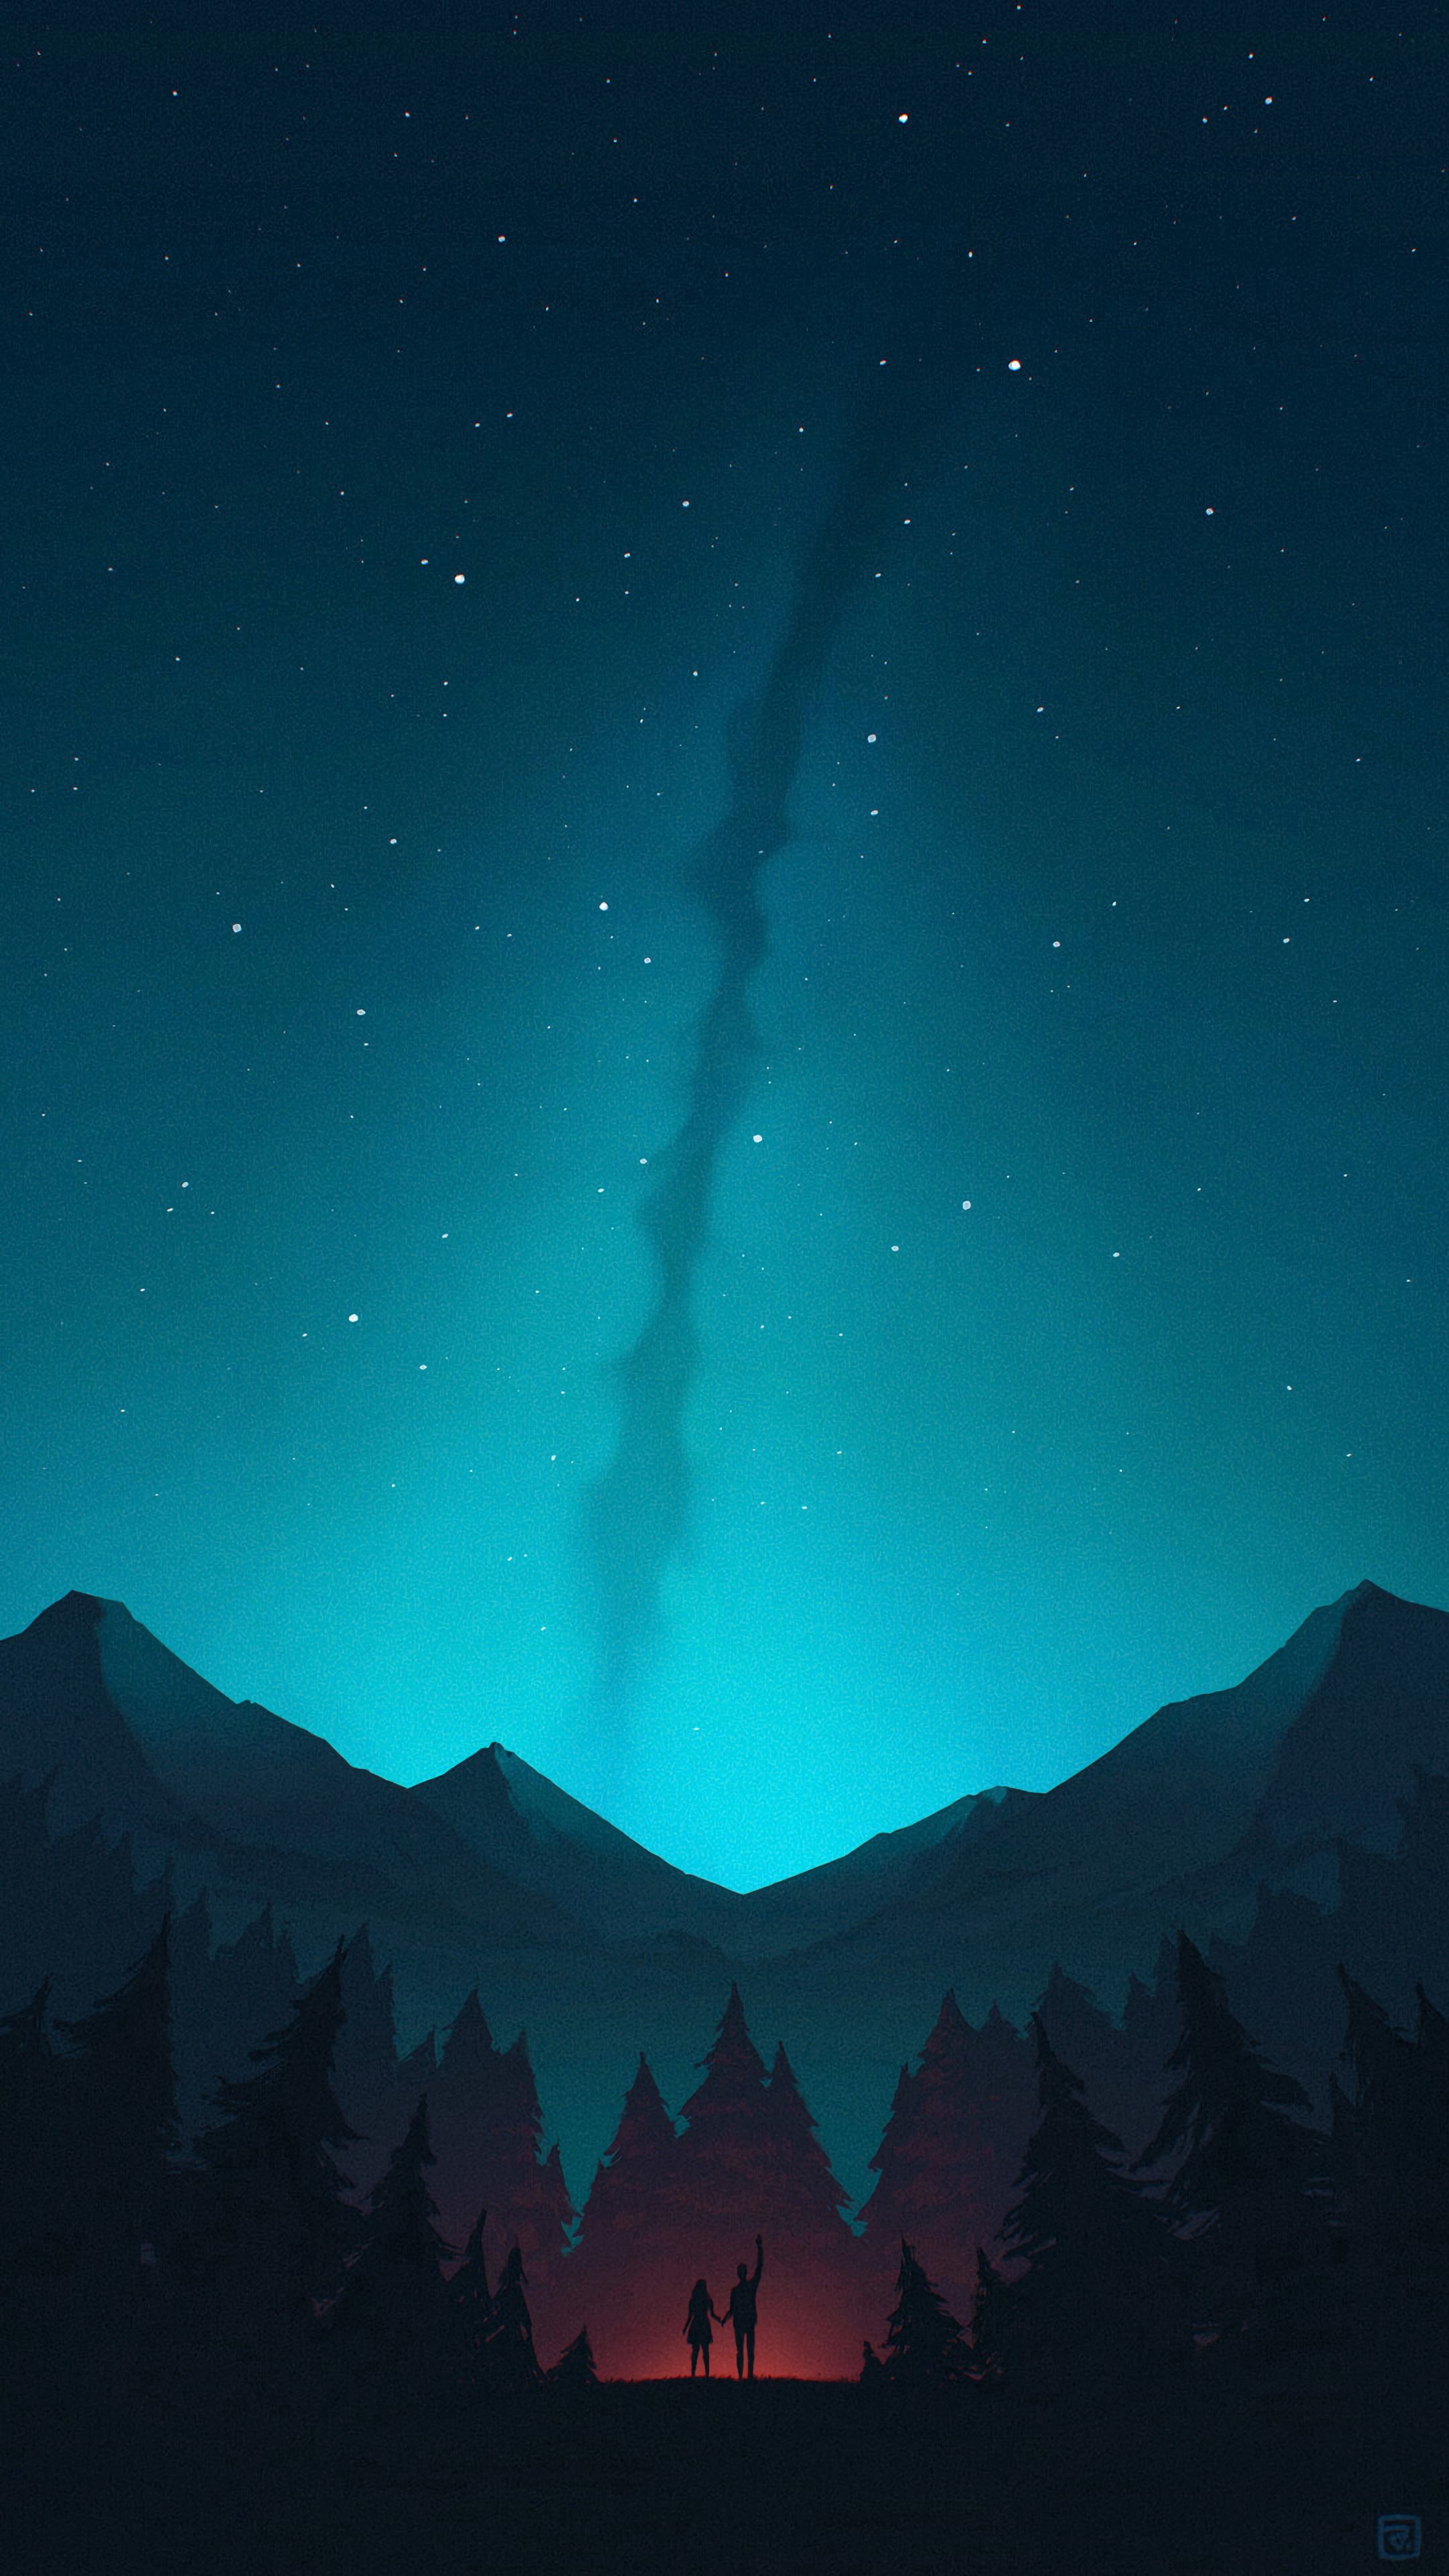 android art, night, silhouettes, mountains, forest, starry sky